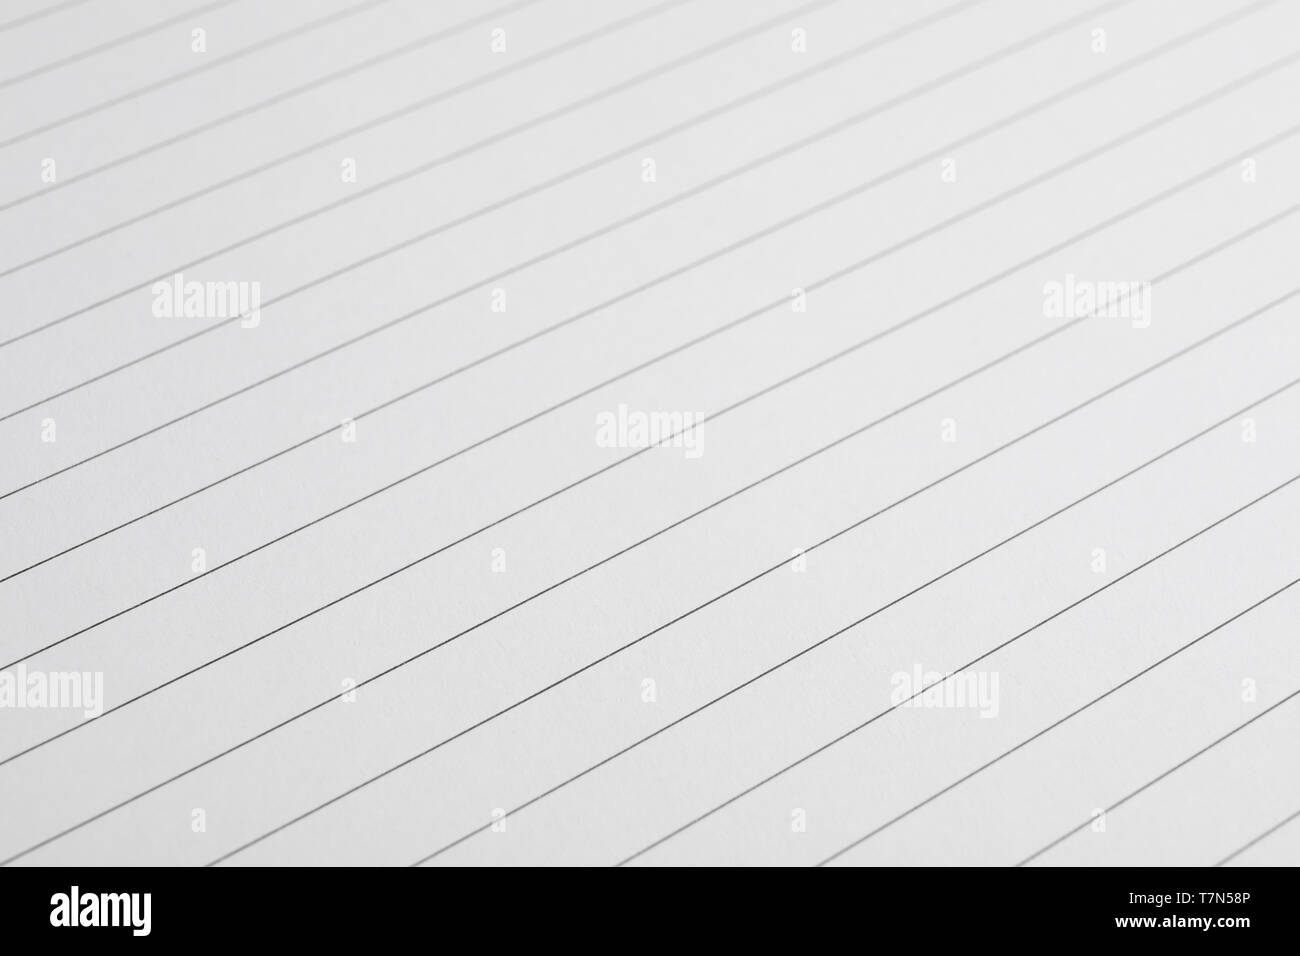 Sheet of notebook with horizontal texture as background, space for text Stock Photo